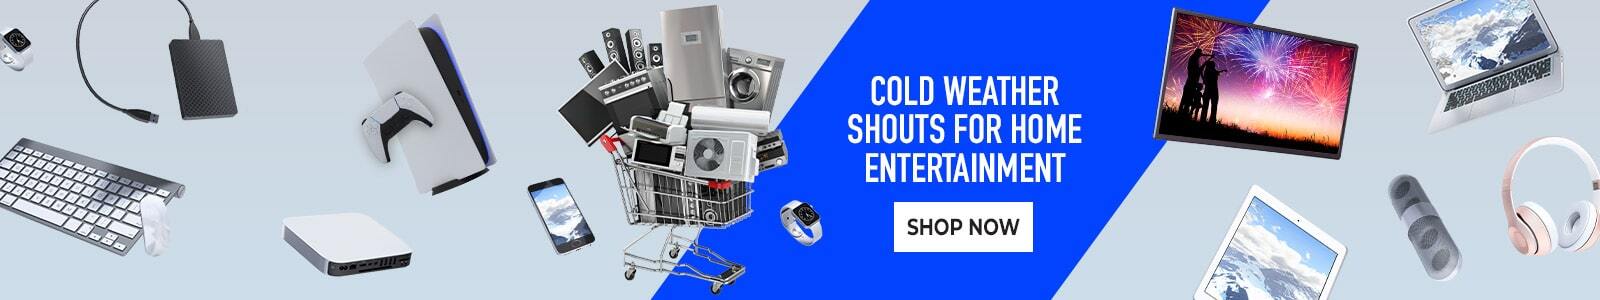 Cold weather shouts for home entertainment Shop Now